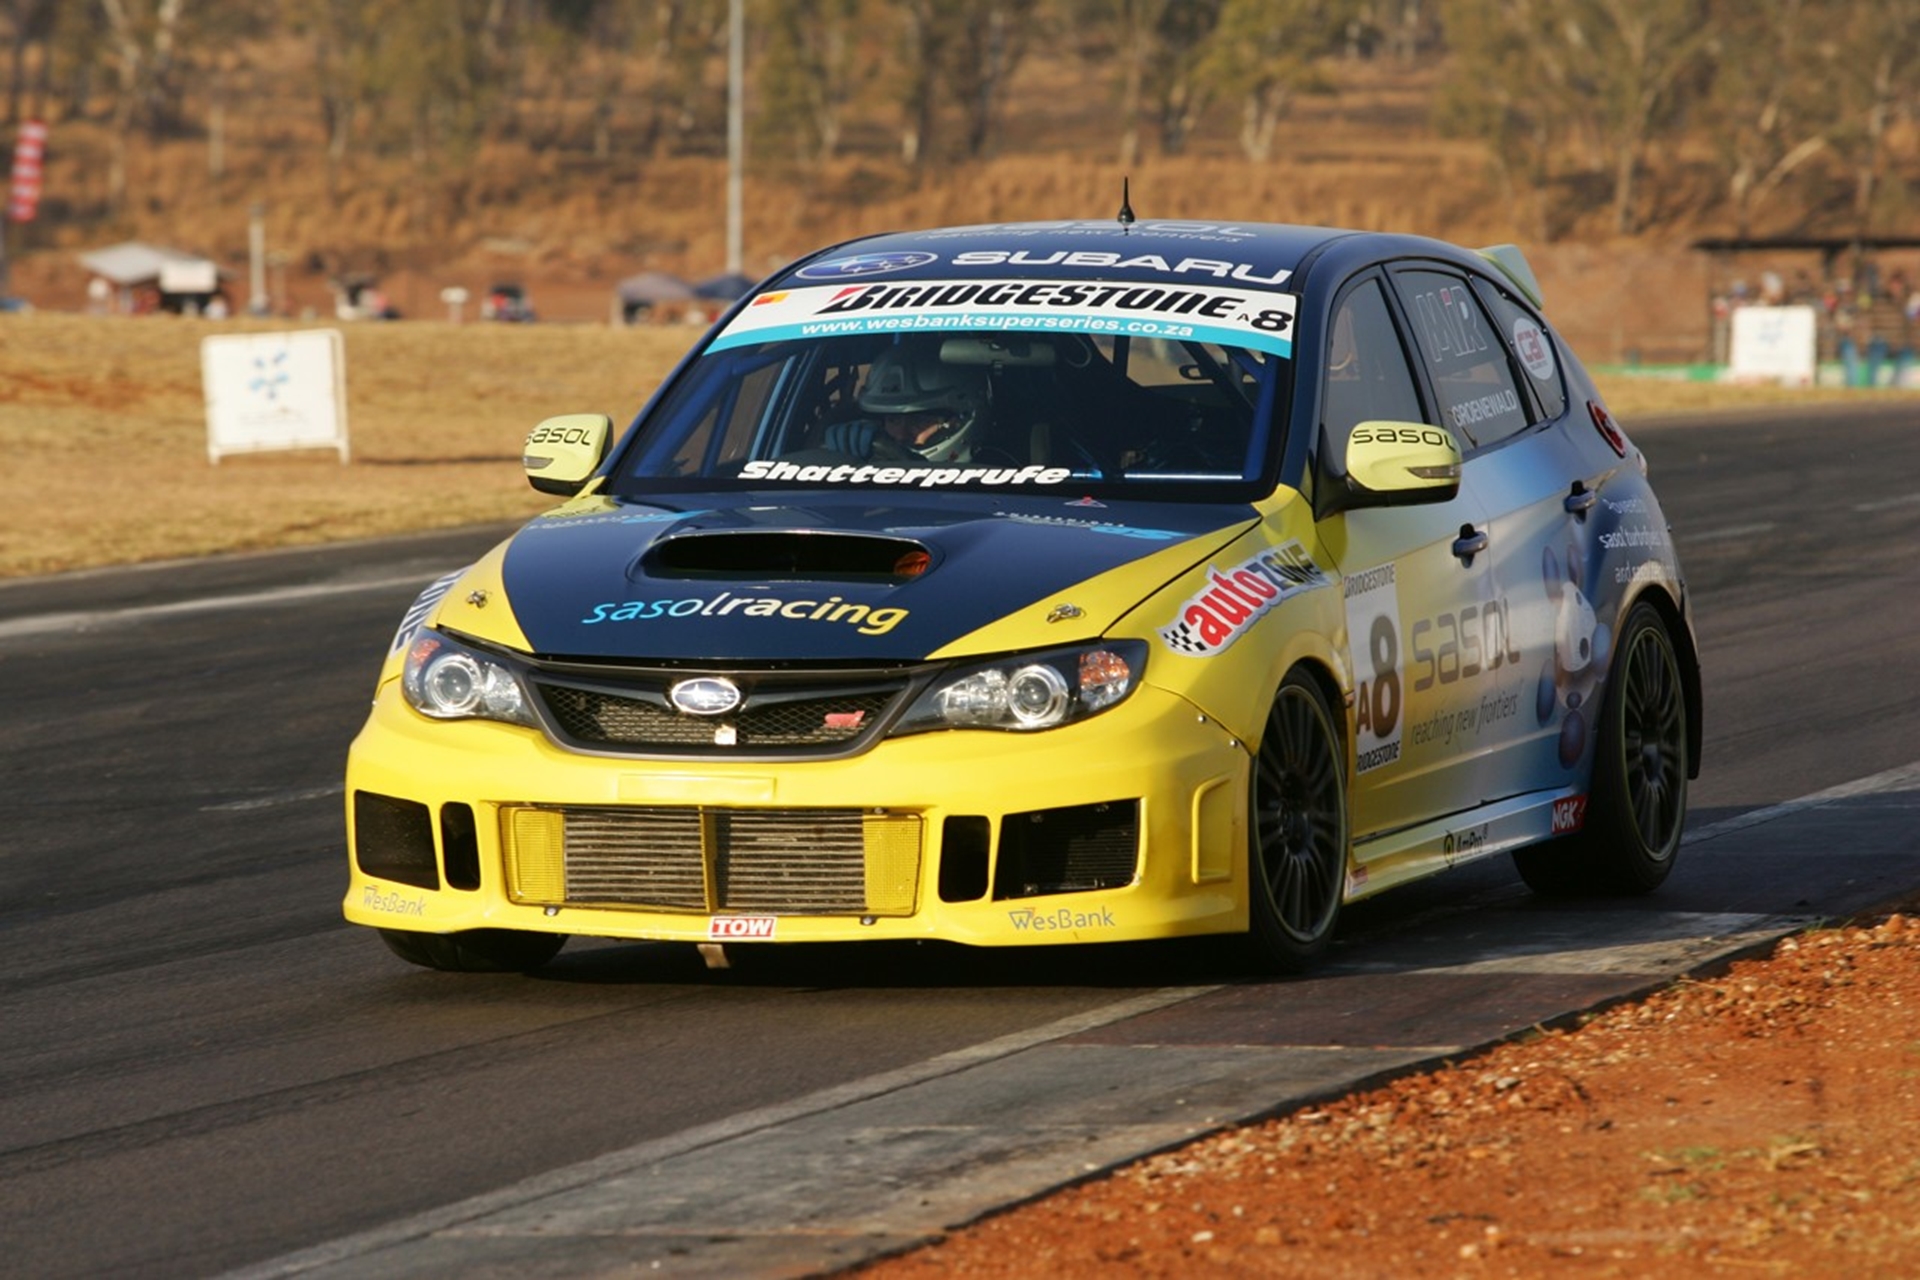 SASOL RACING CIRCUIT TEAM SHINES IN HOME EVENT